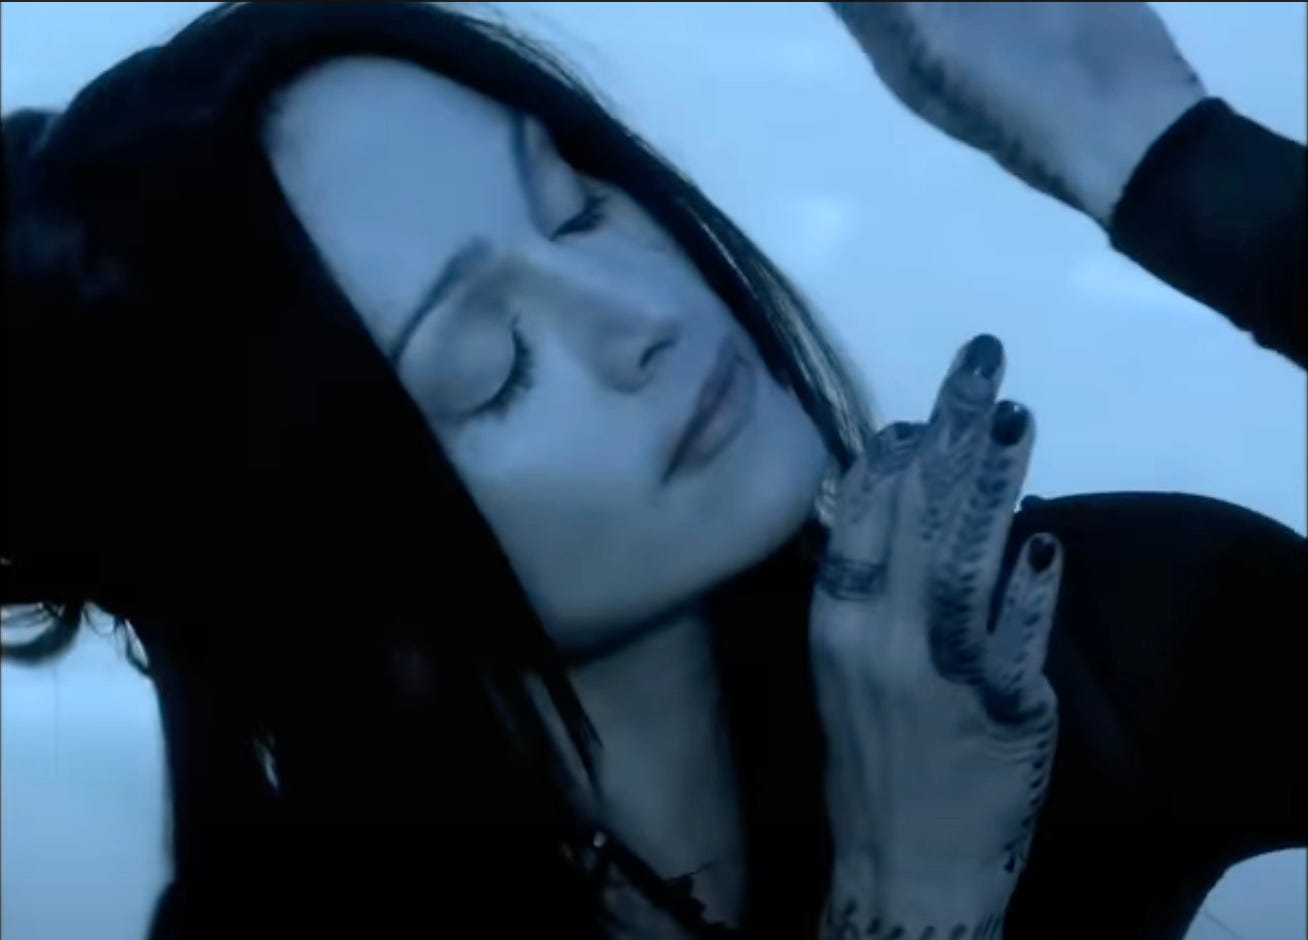 Madonna with her eyes closed in close-up posing with her hands near her face in the Frozen video